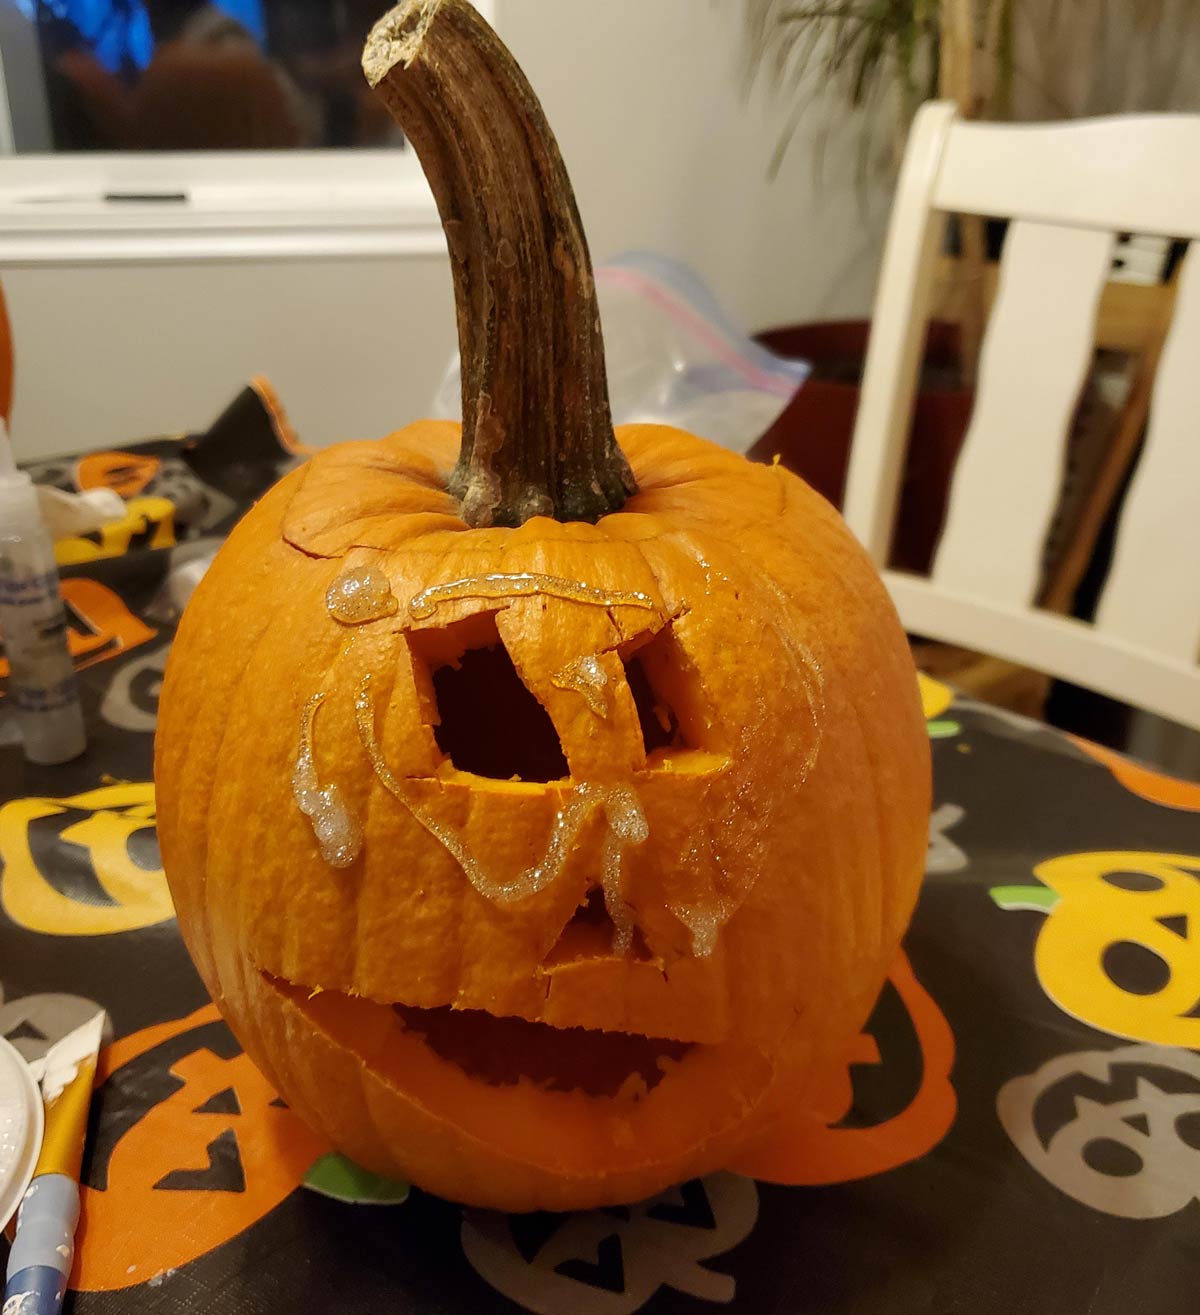 Our little neighbor friend made his first pumpkin. I managed to not laugh out loud at the added glitter